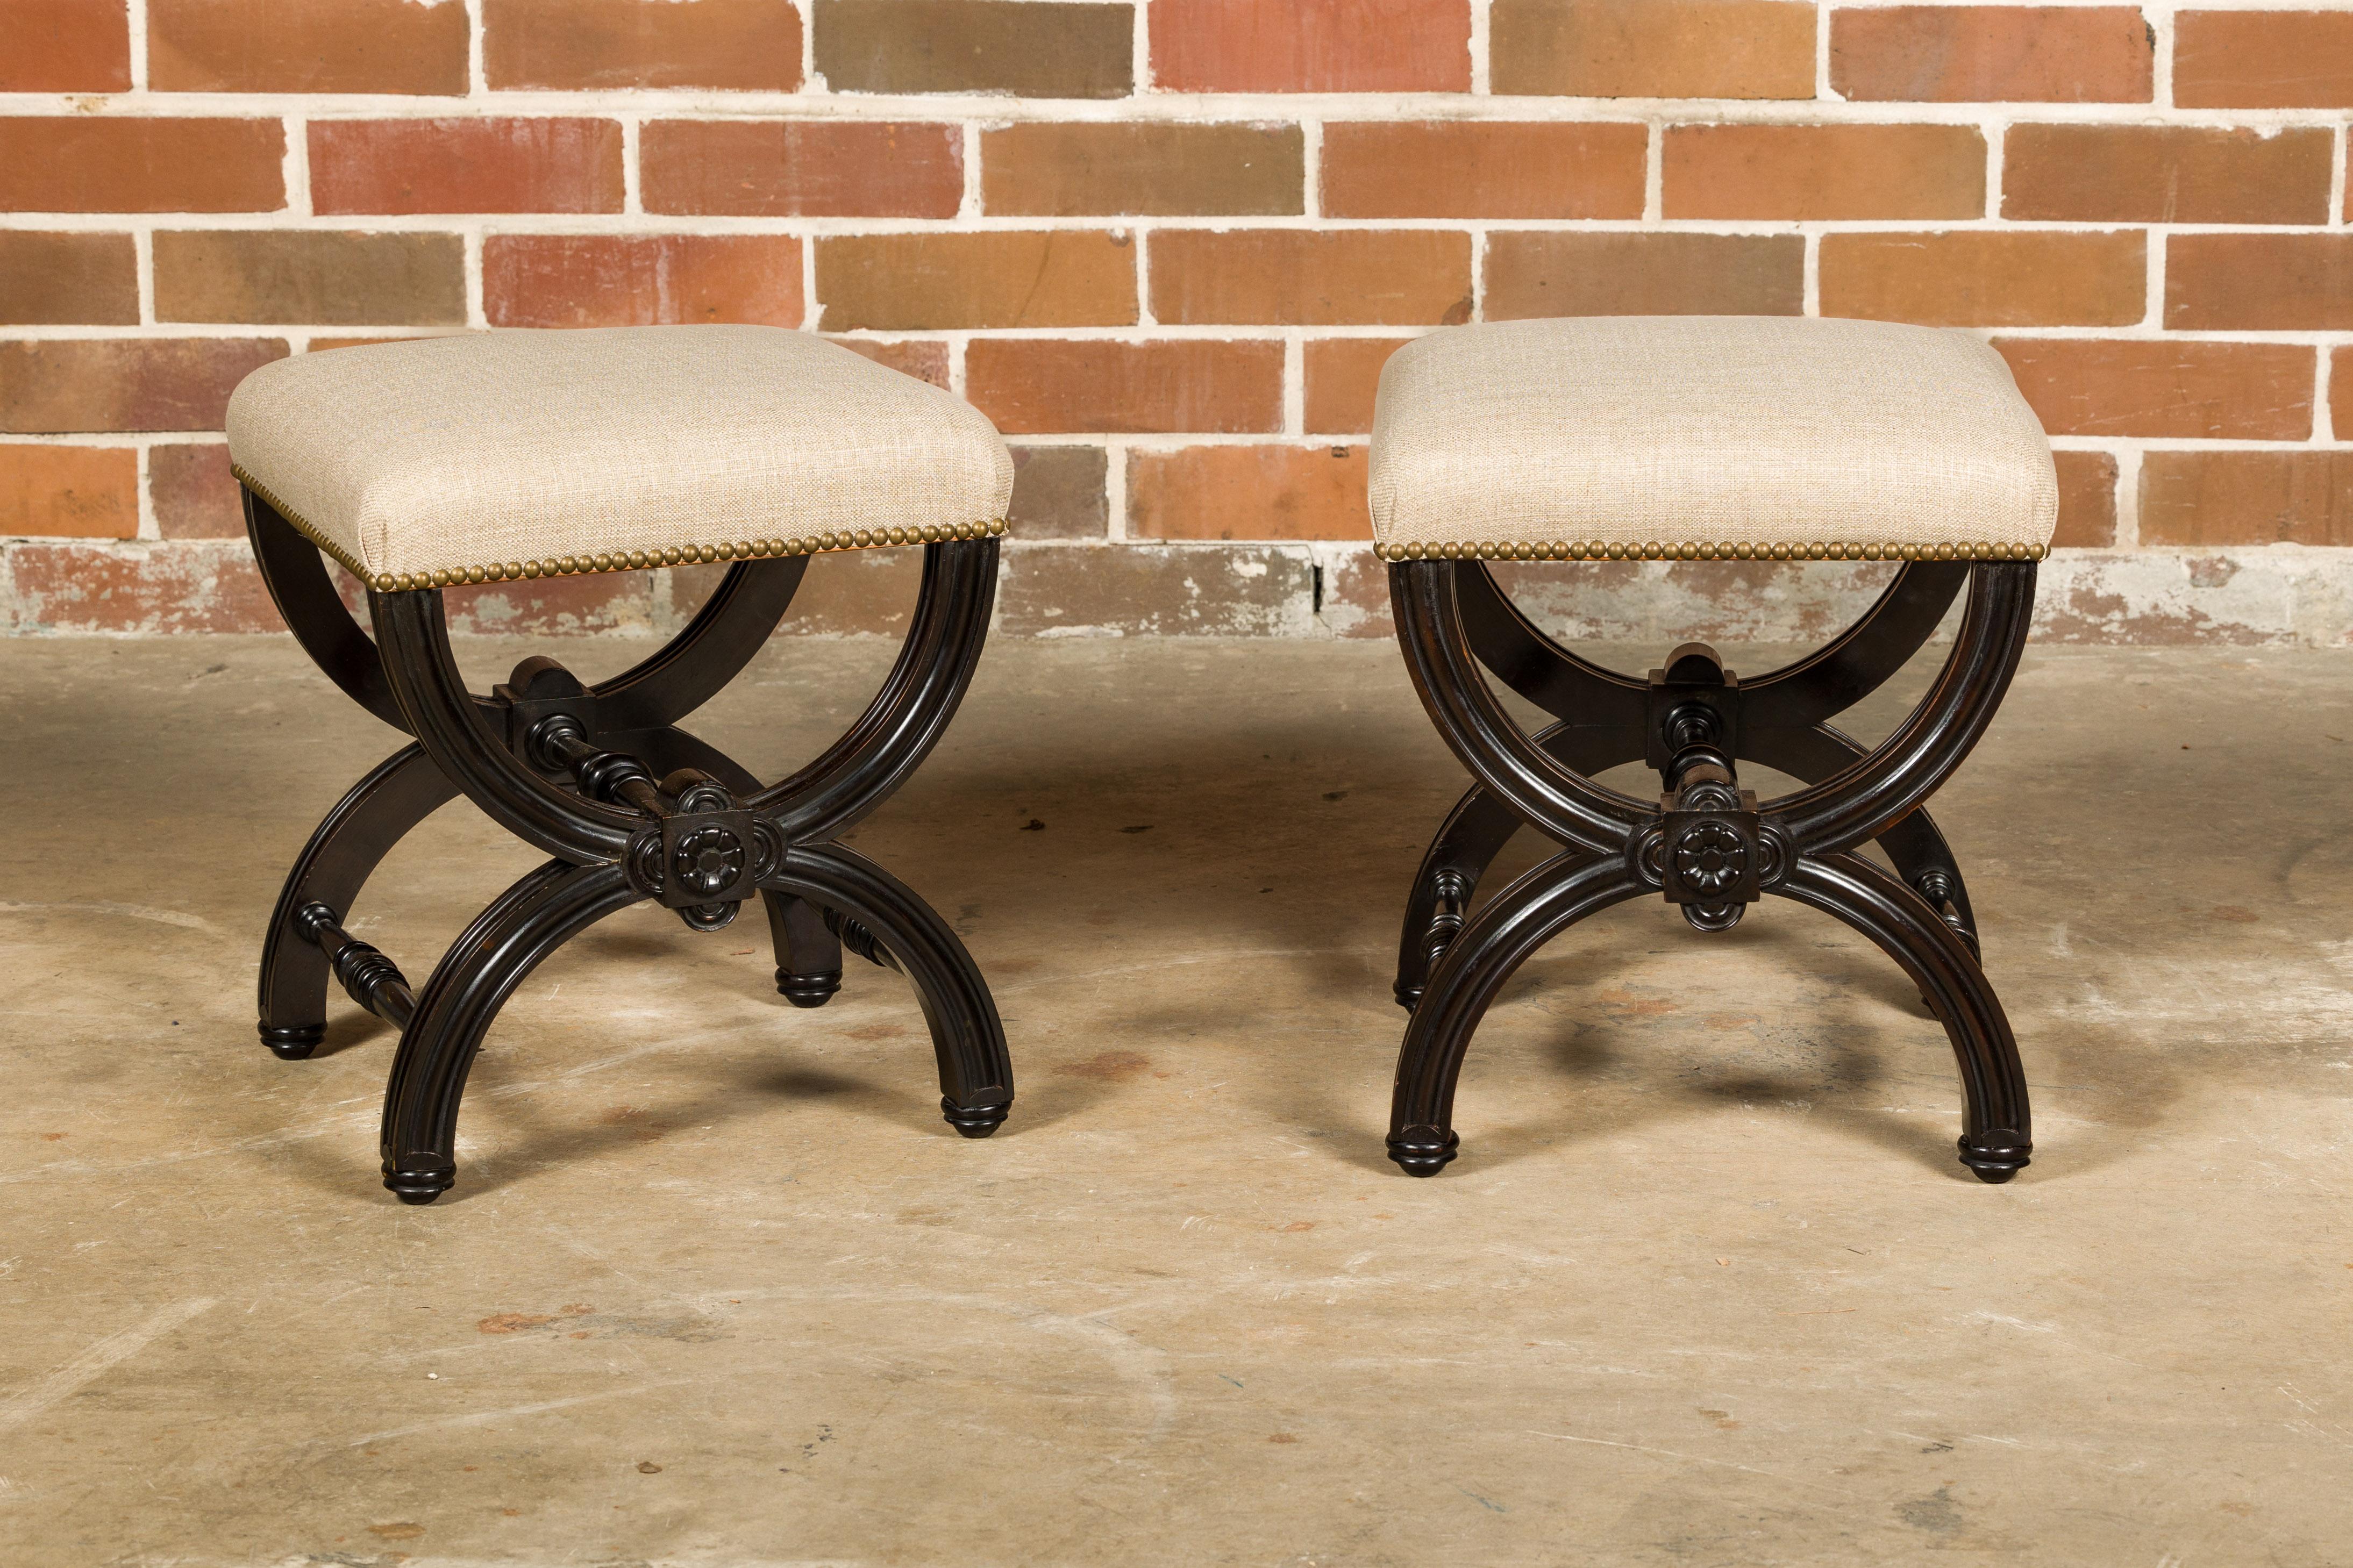 A pair of Austrian 1900s black stools from Vienna with X-Form bases, turned stretchers and new custom linen upholstery. These early 1900s Austrian black stools hailing from the cultural hub of Vienna are a testament to the city's rich tradition of